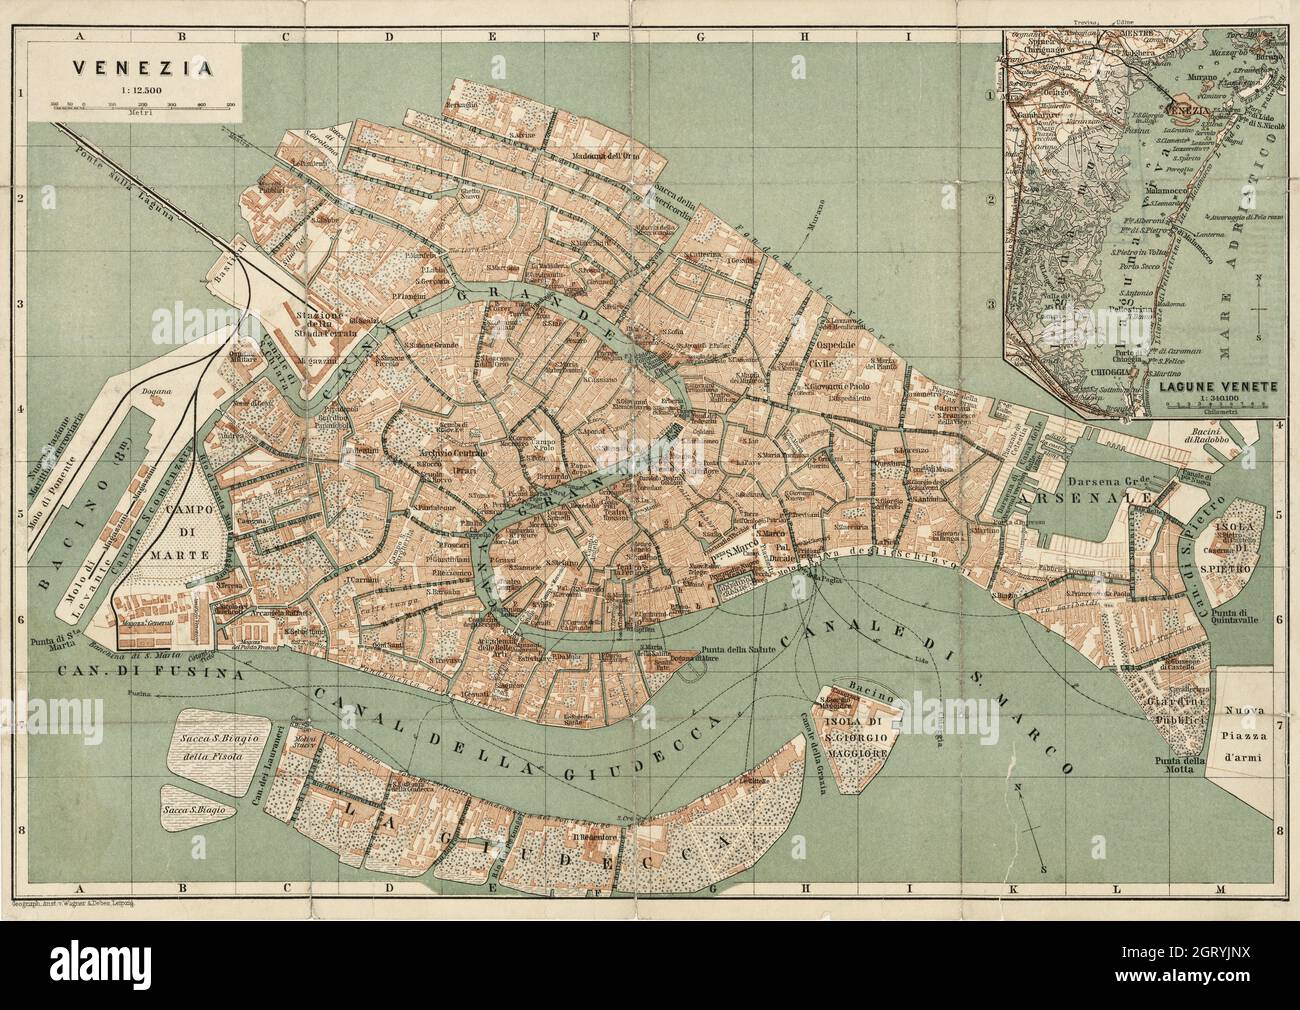 Venezia – Map of Venice by Wagner & Debes. 1886. Stock Photo